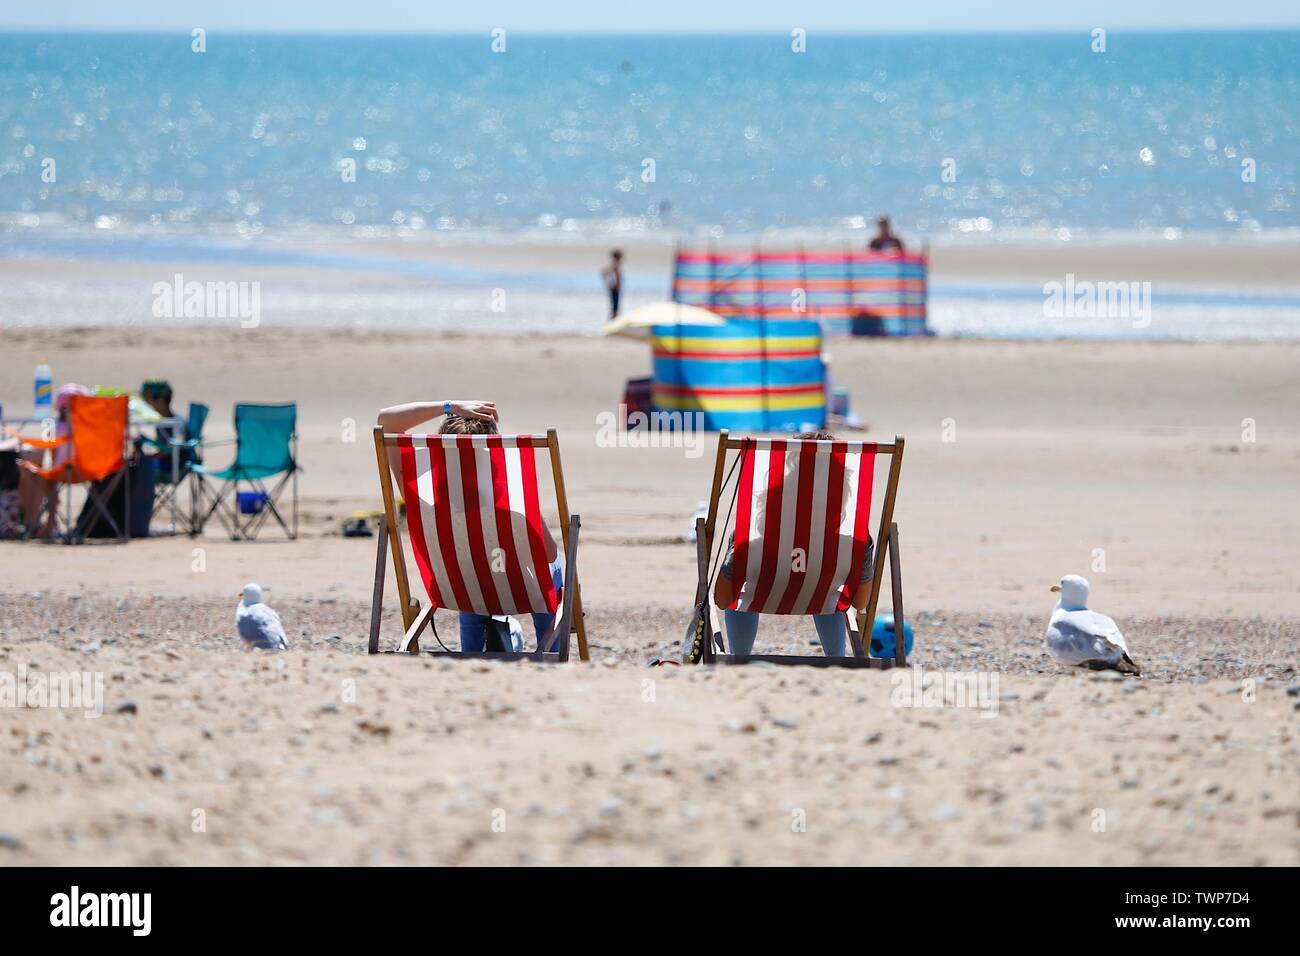 Camber, East Sussex, UK. 22 Jun, 2019. A beautiful sunny start to the weekend in Camber, East Sussex as people arrive to the Camber Sands beach to enjoy the warm weather. Couple sitting in silhouette on stripey deck chairs on the beach. ©Paul Lawrenson 2019, Photo Credit: Paul Lawrenson/Alamy Live News Stock Photo